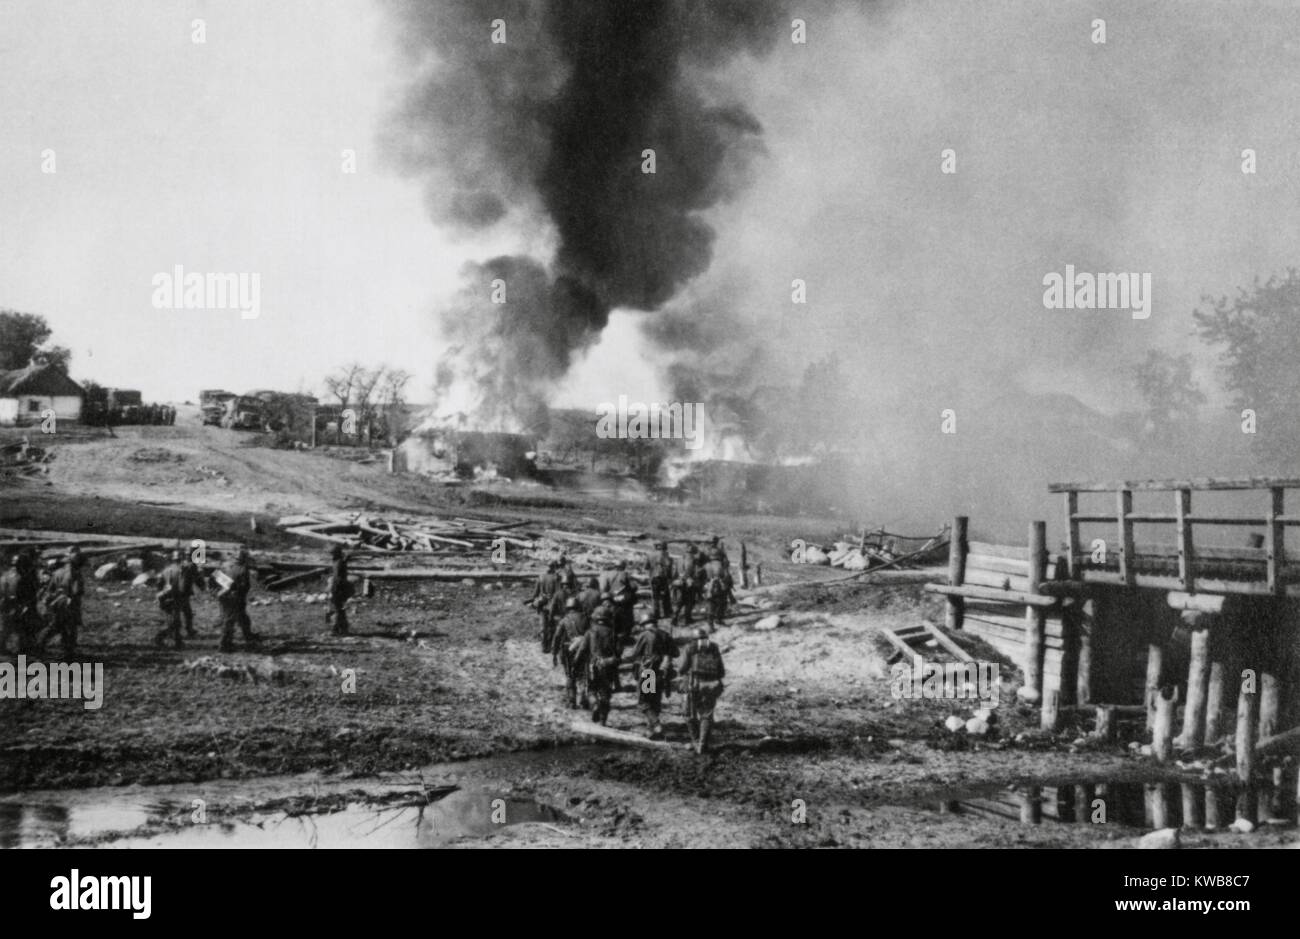 German infantry advancing on a burning village in the Soviet Union (Russia). Summer of 1941, during World War 2. (BSLOC 2014 8 7) Stock Photo